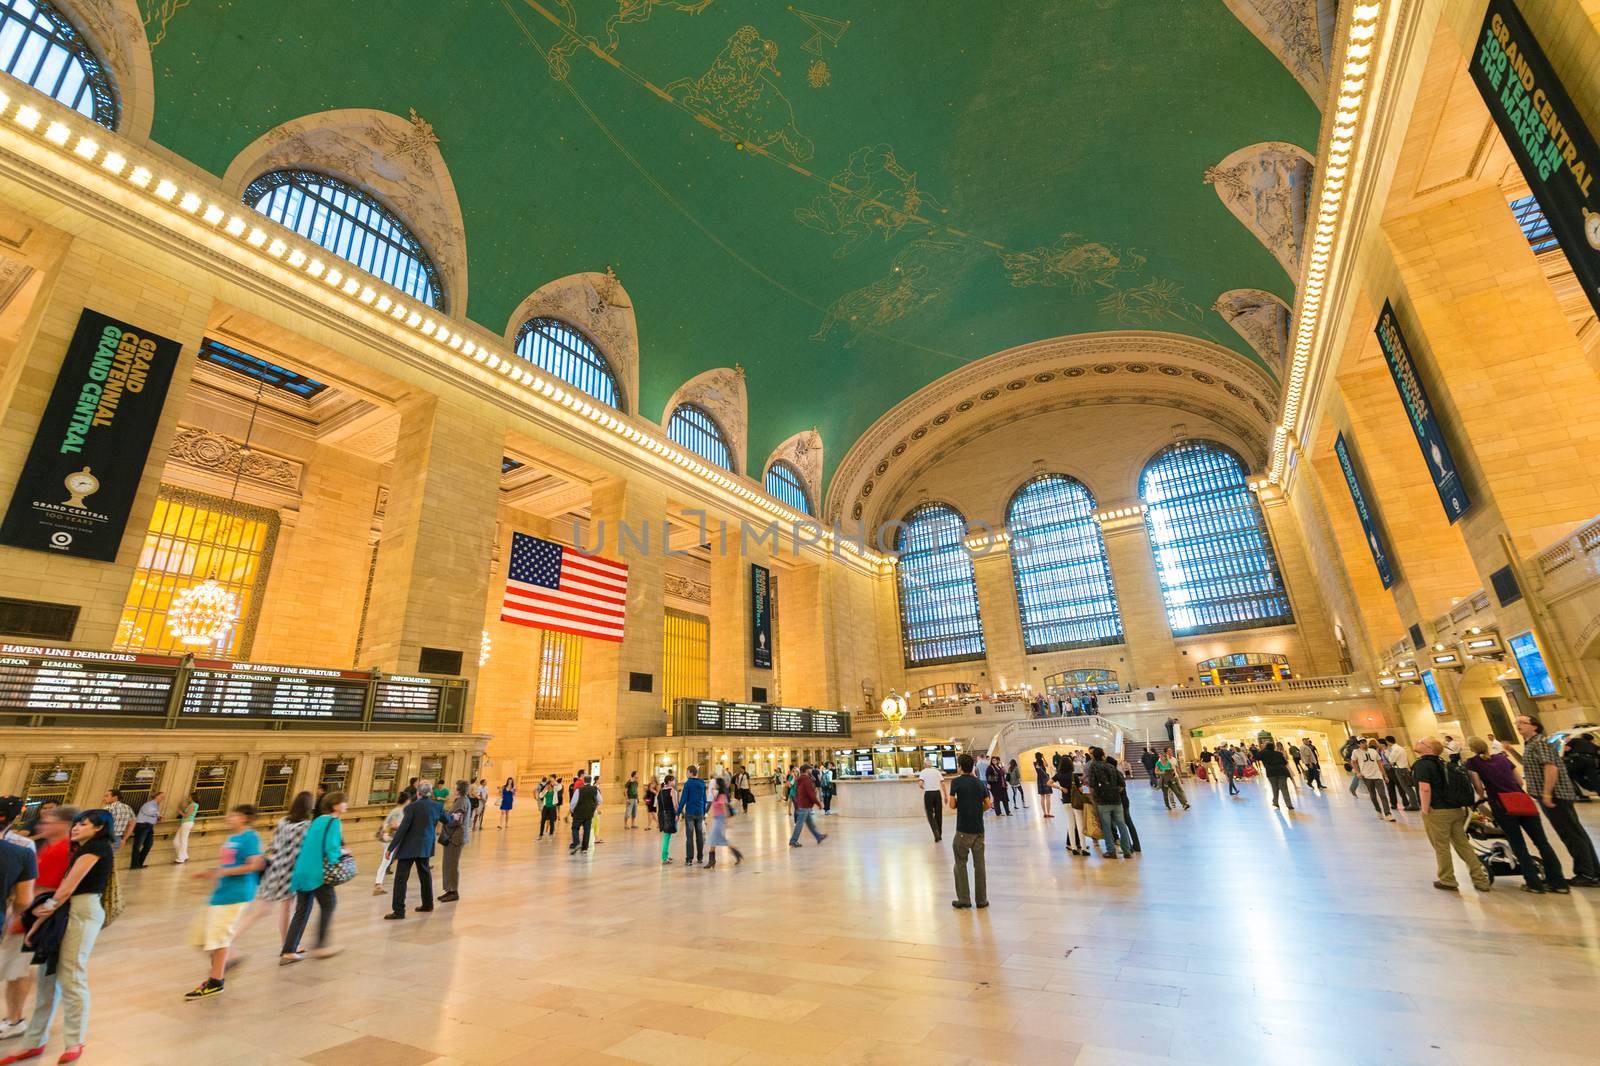 NEW YORK CITY - MAY 20: Interior of Grand Central Station on May 20, 2013 in New York City, NY. The terminal is the largest train station in the world by number of platforms having 44